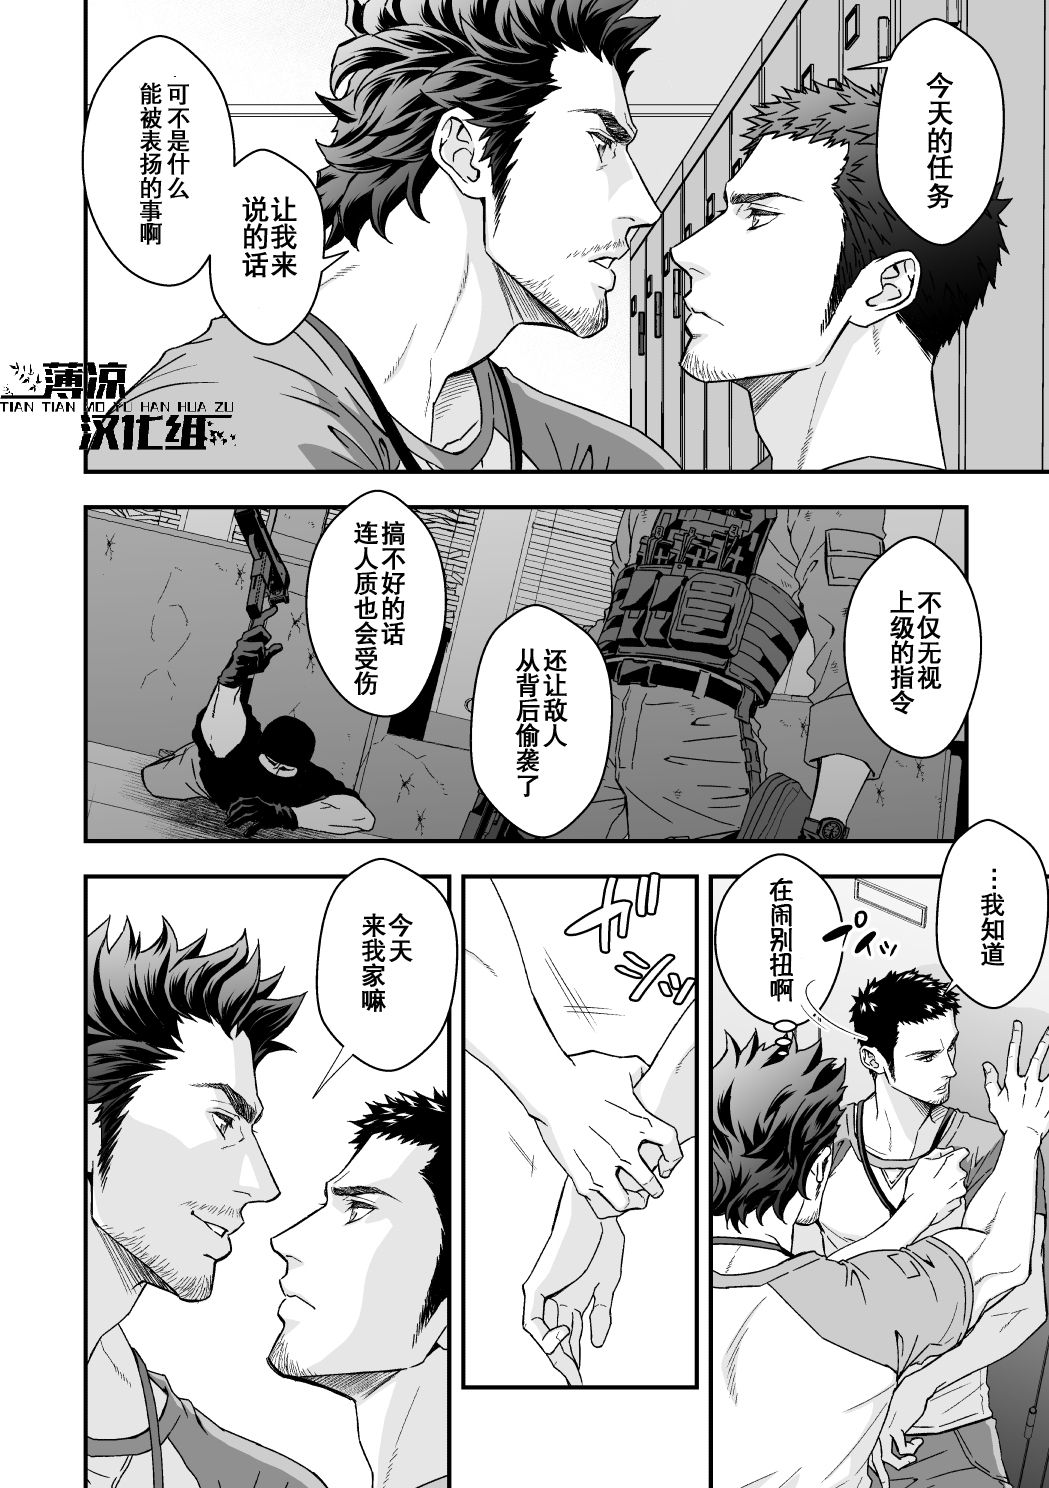 [Unknown (UNKNOWN)] Jouge Kankei 3 | 上下关系3 [Chinese] [薄凉汉化组] page 10 full